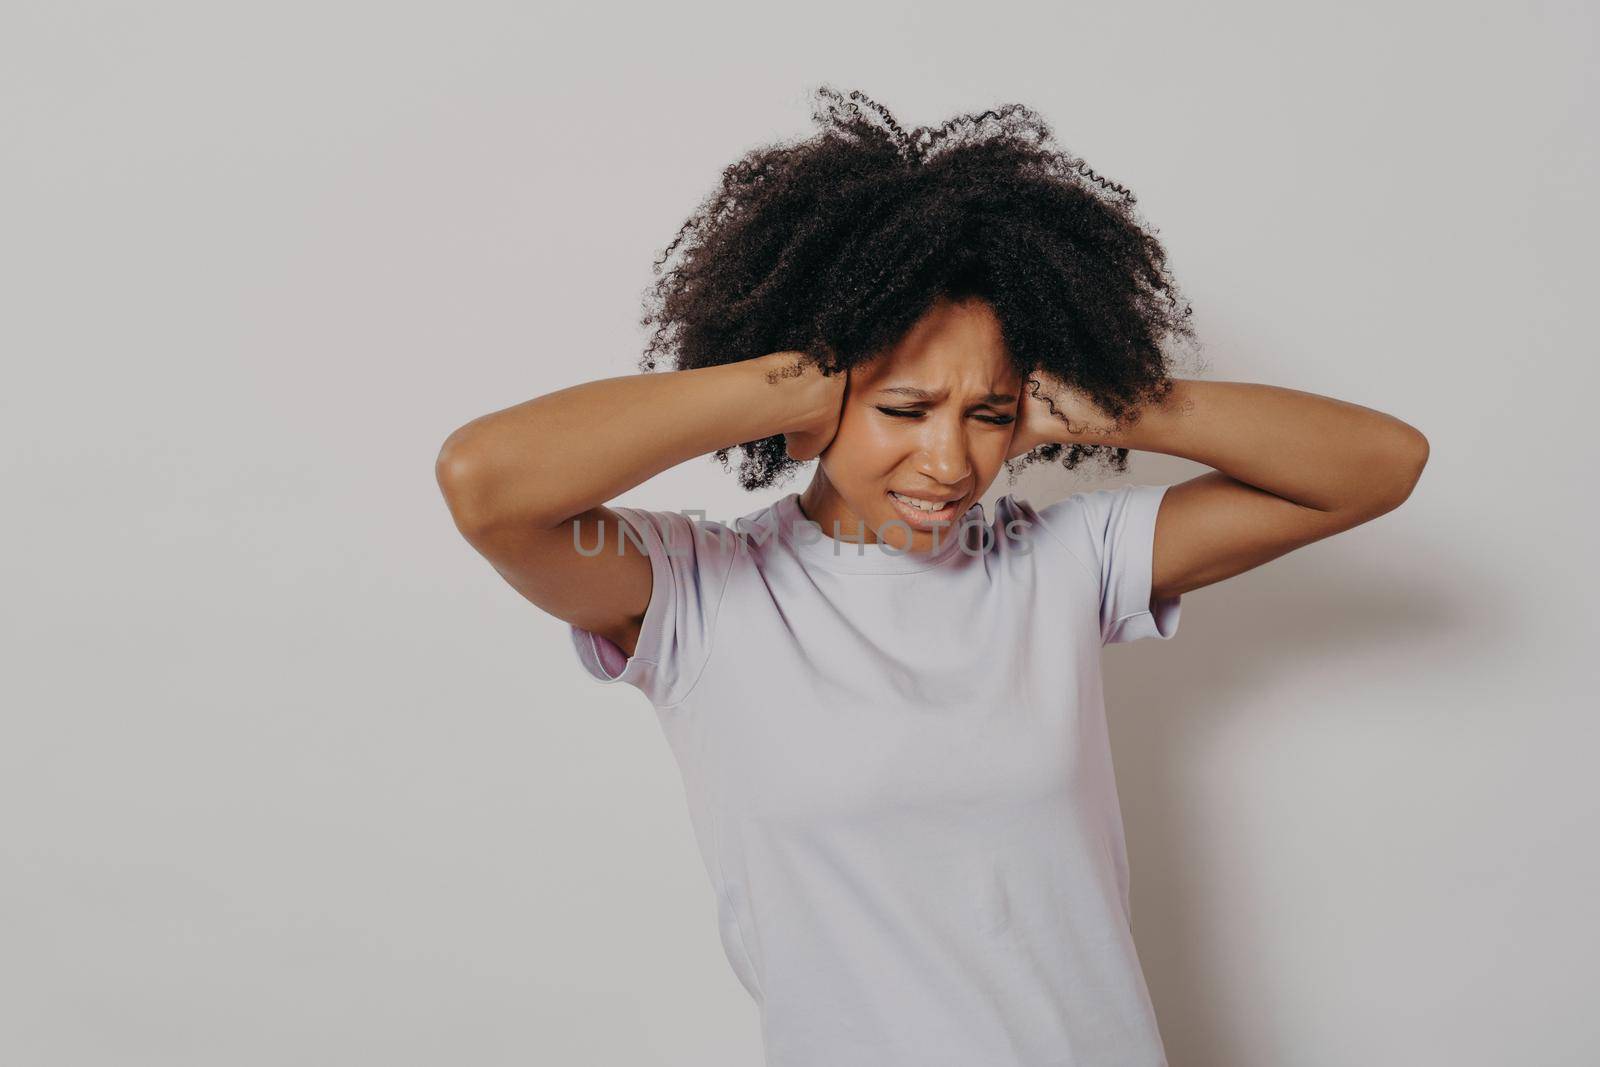 Studio portrait of young angry annoyed african woman covering her ears with both hands to avoid loud noise while posing against white background, dressed in white tshirt. Negative human emotions